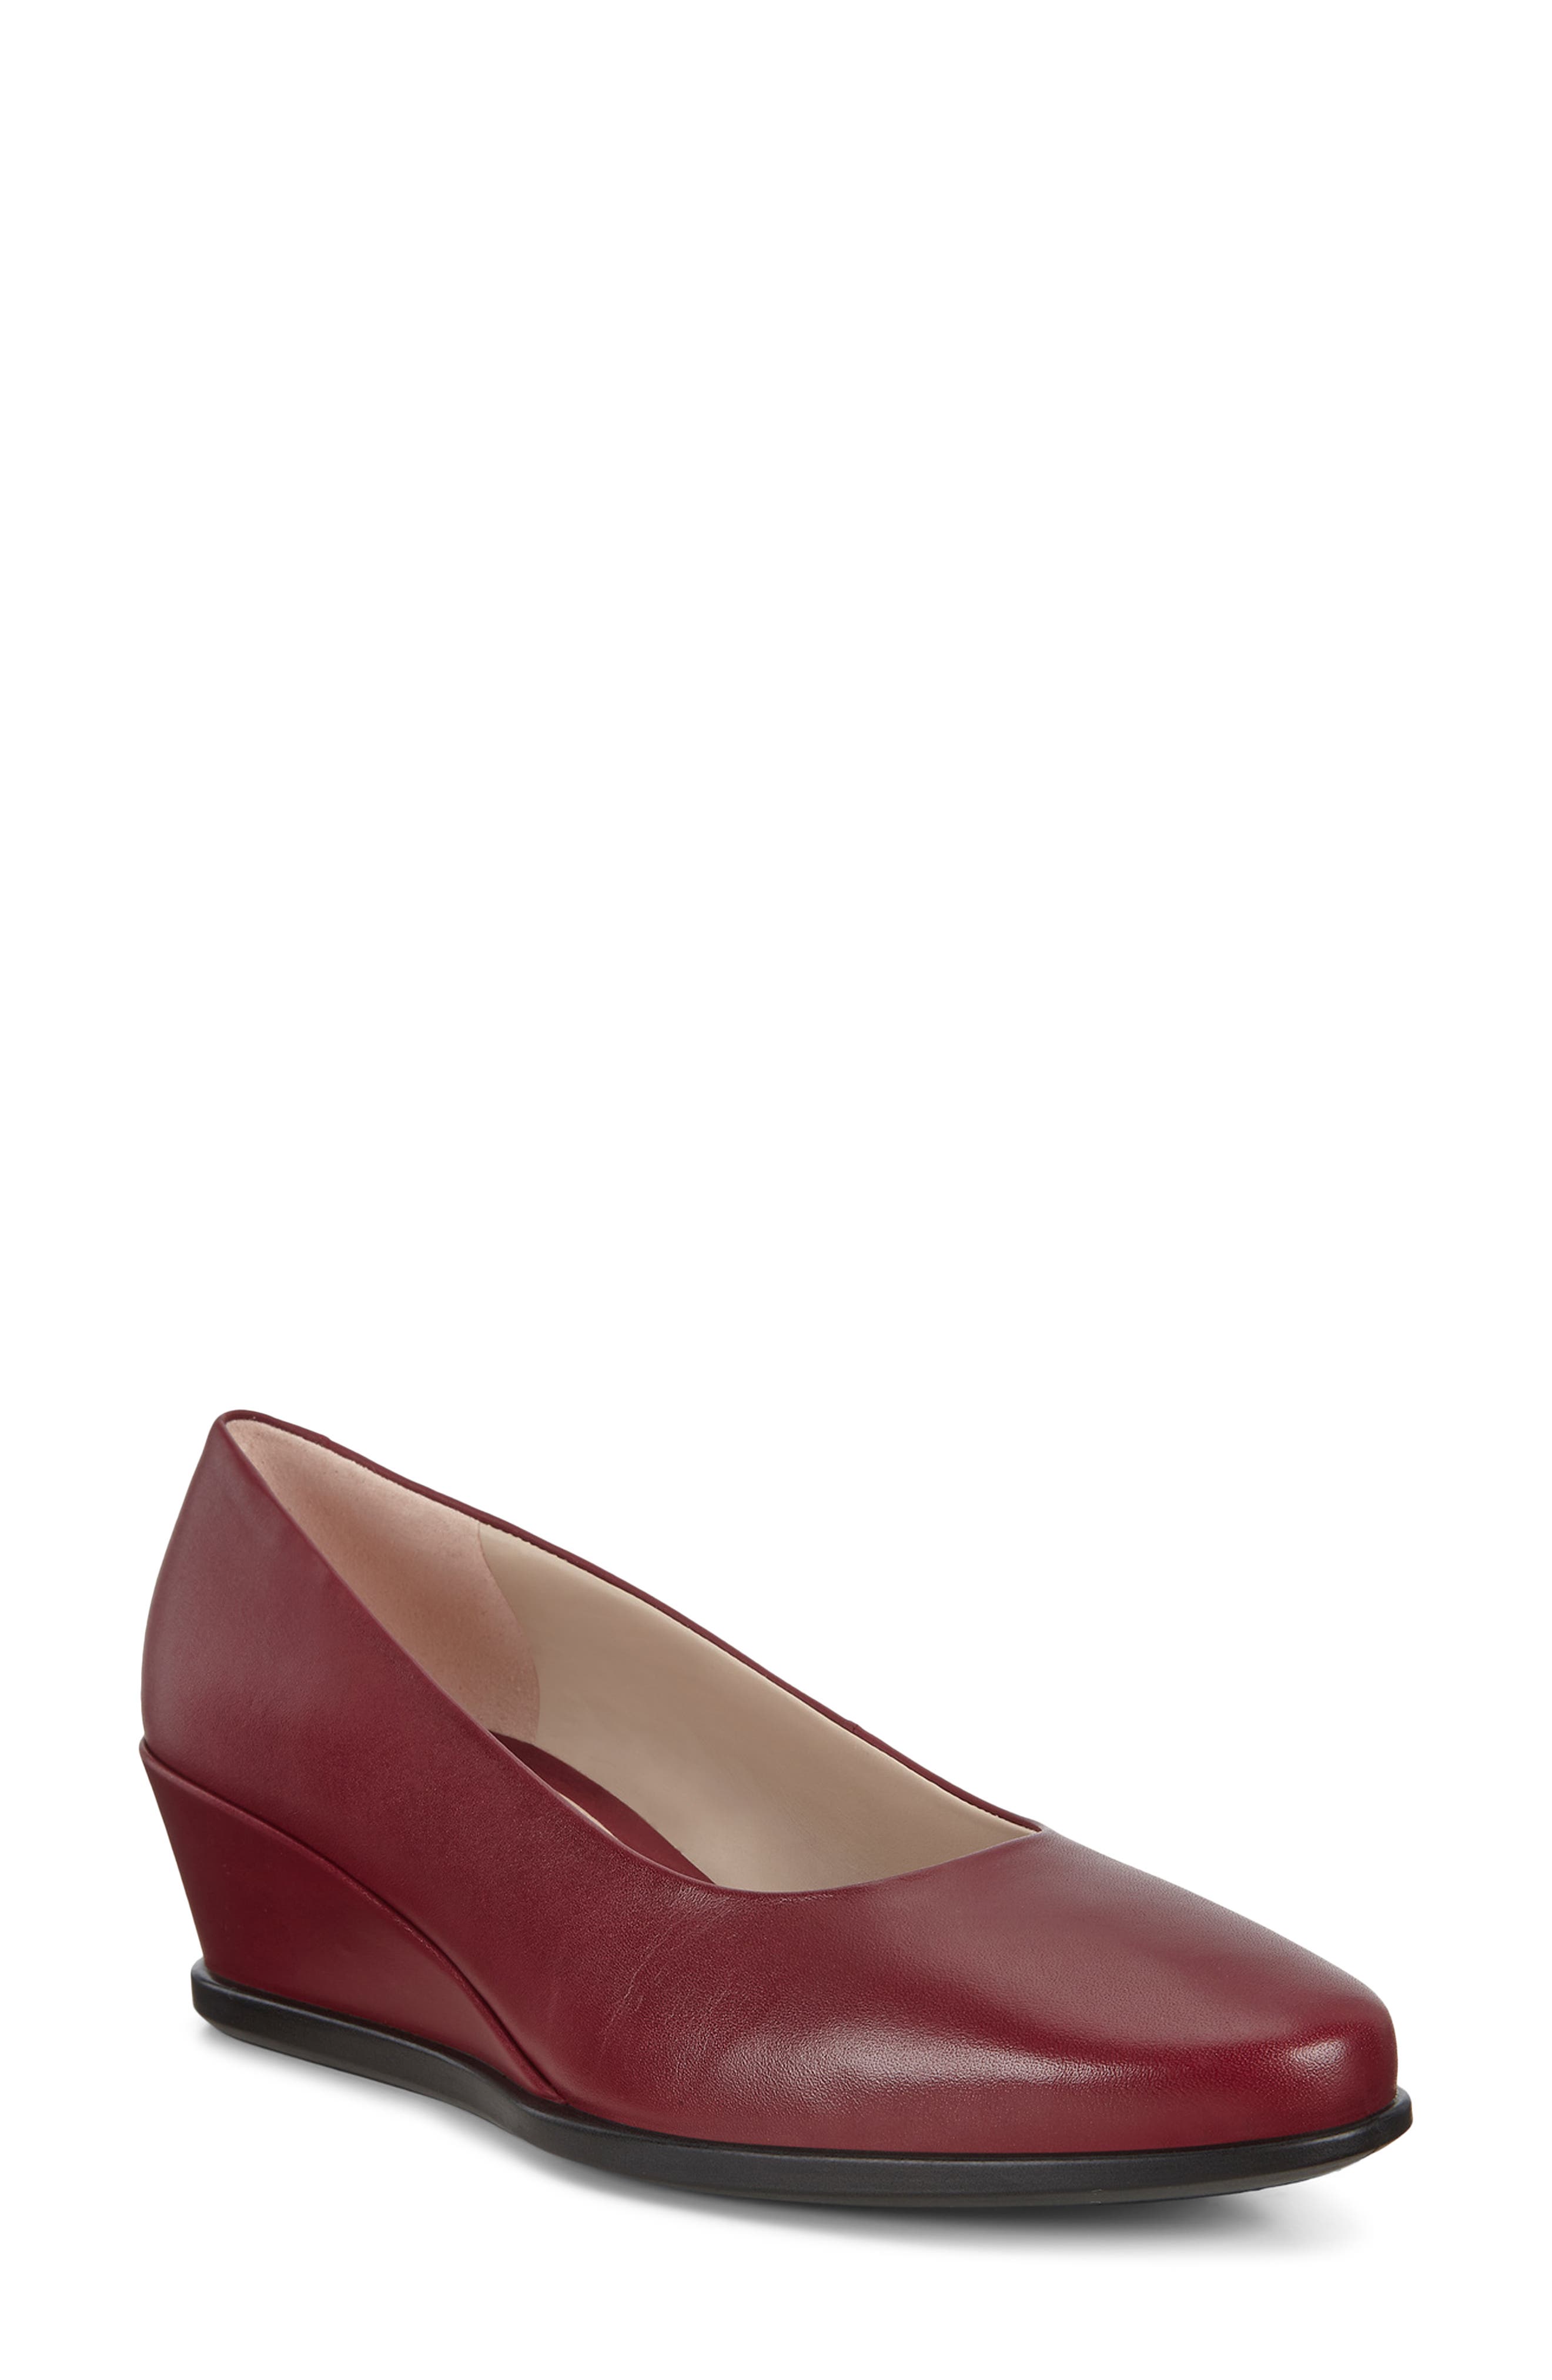 UPC 825840742091 product image for Women's Ecco Shape 45 Wedge Pump, Size 9-9.5US - Red | upcitemdb.com